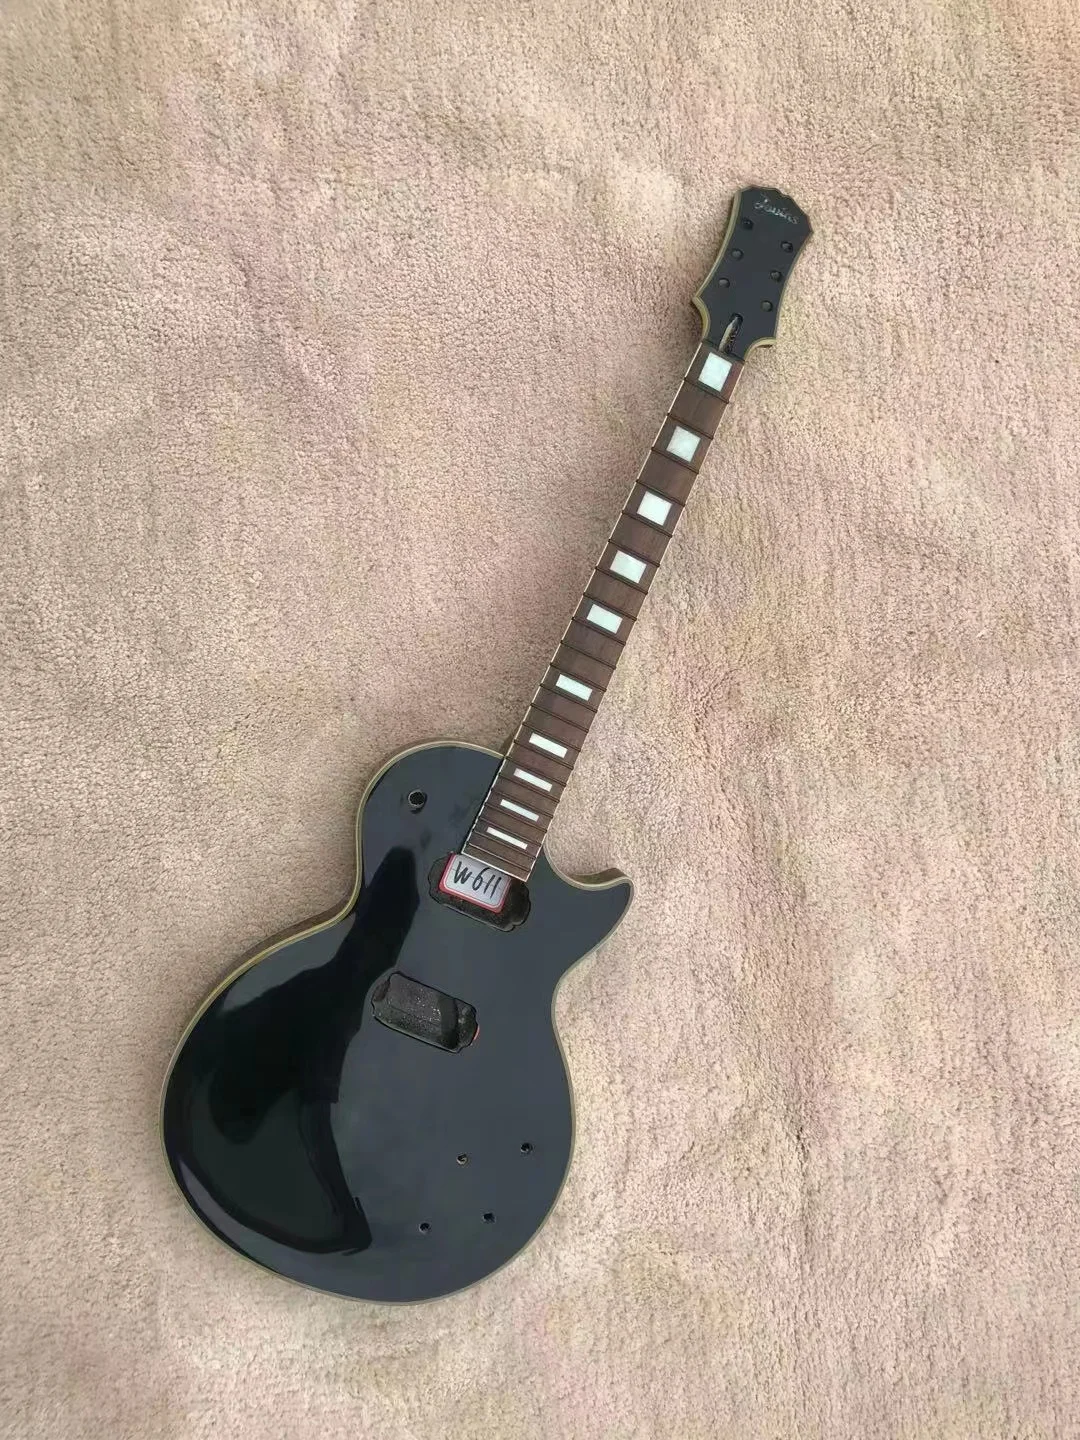 DIY (Not New) Custom Electric Guitar Black Beauty without Hardwares in Stock Discount Free Shipping W611